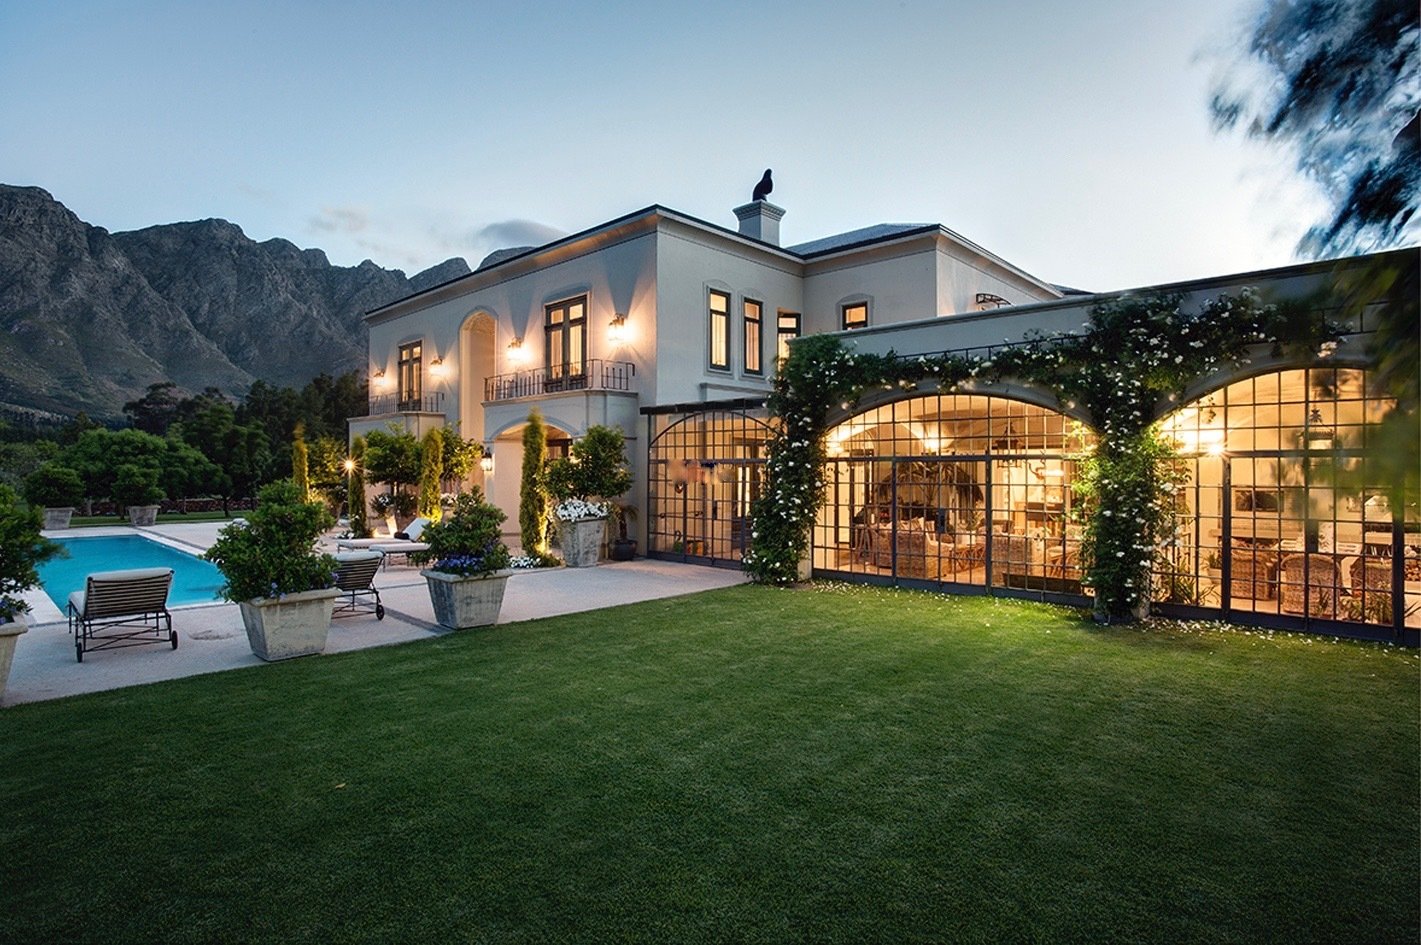 House in Franschhoek, Western Cape, South Africa